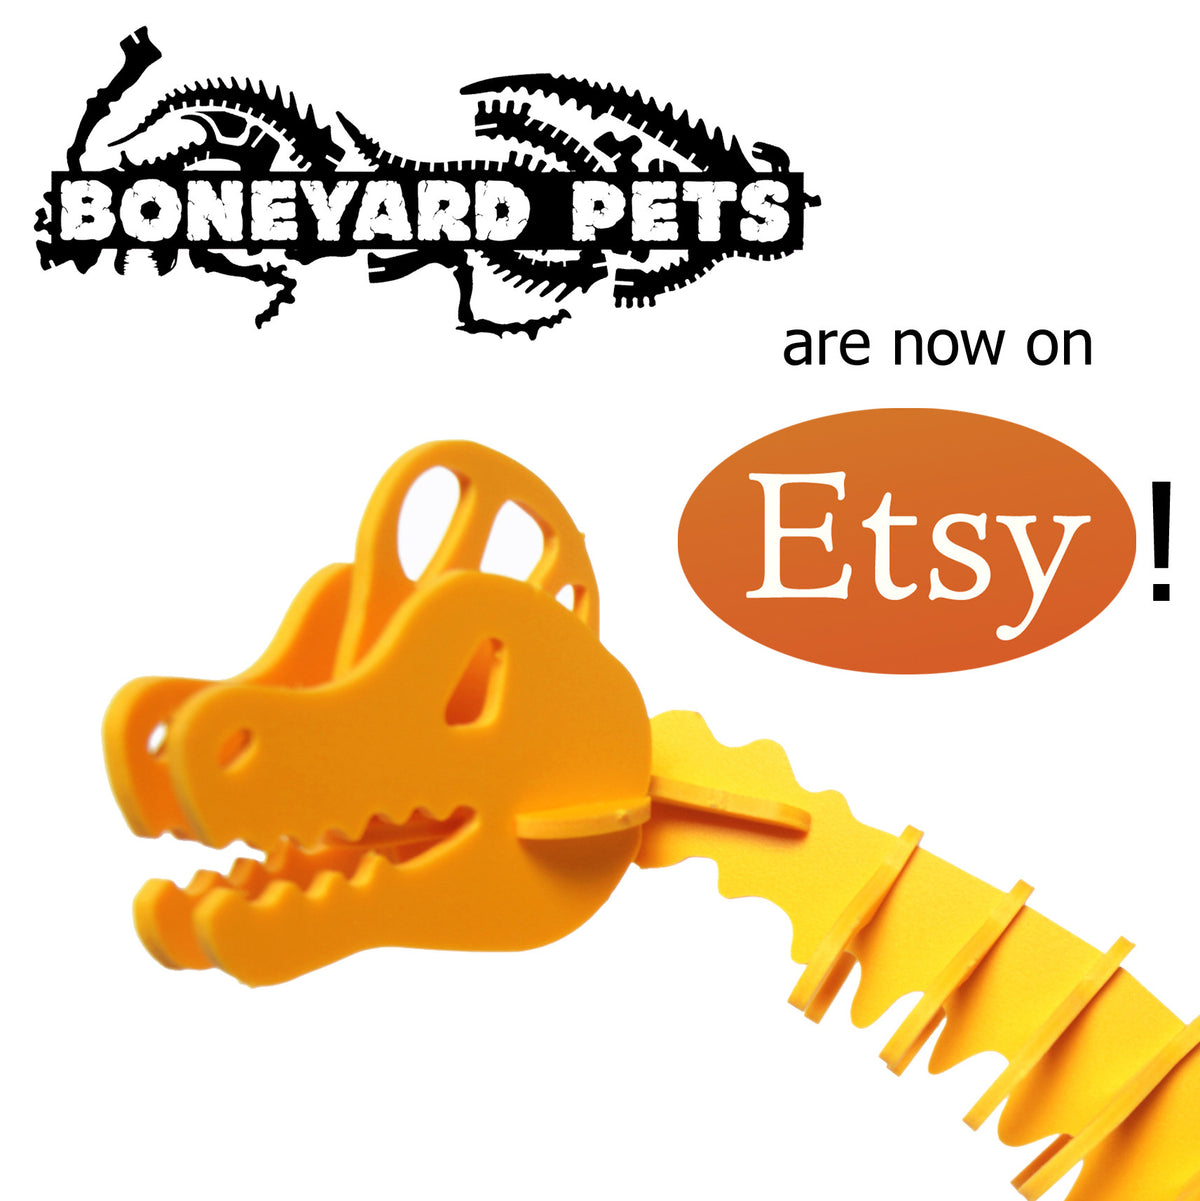 Boneyard Pets are now on Etsy!